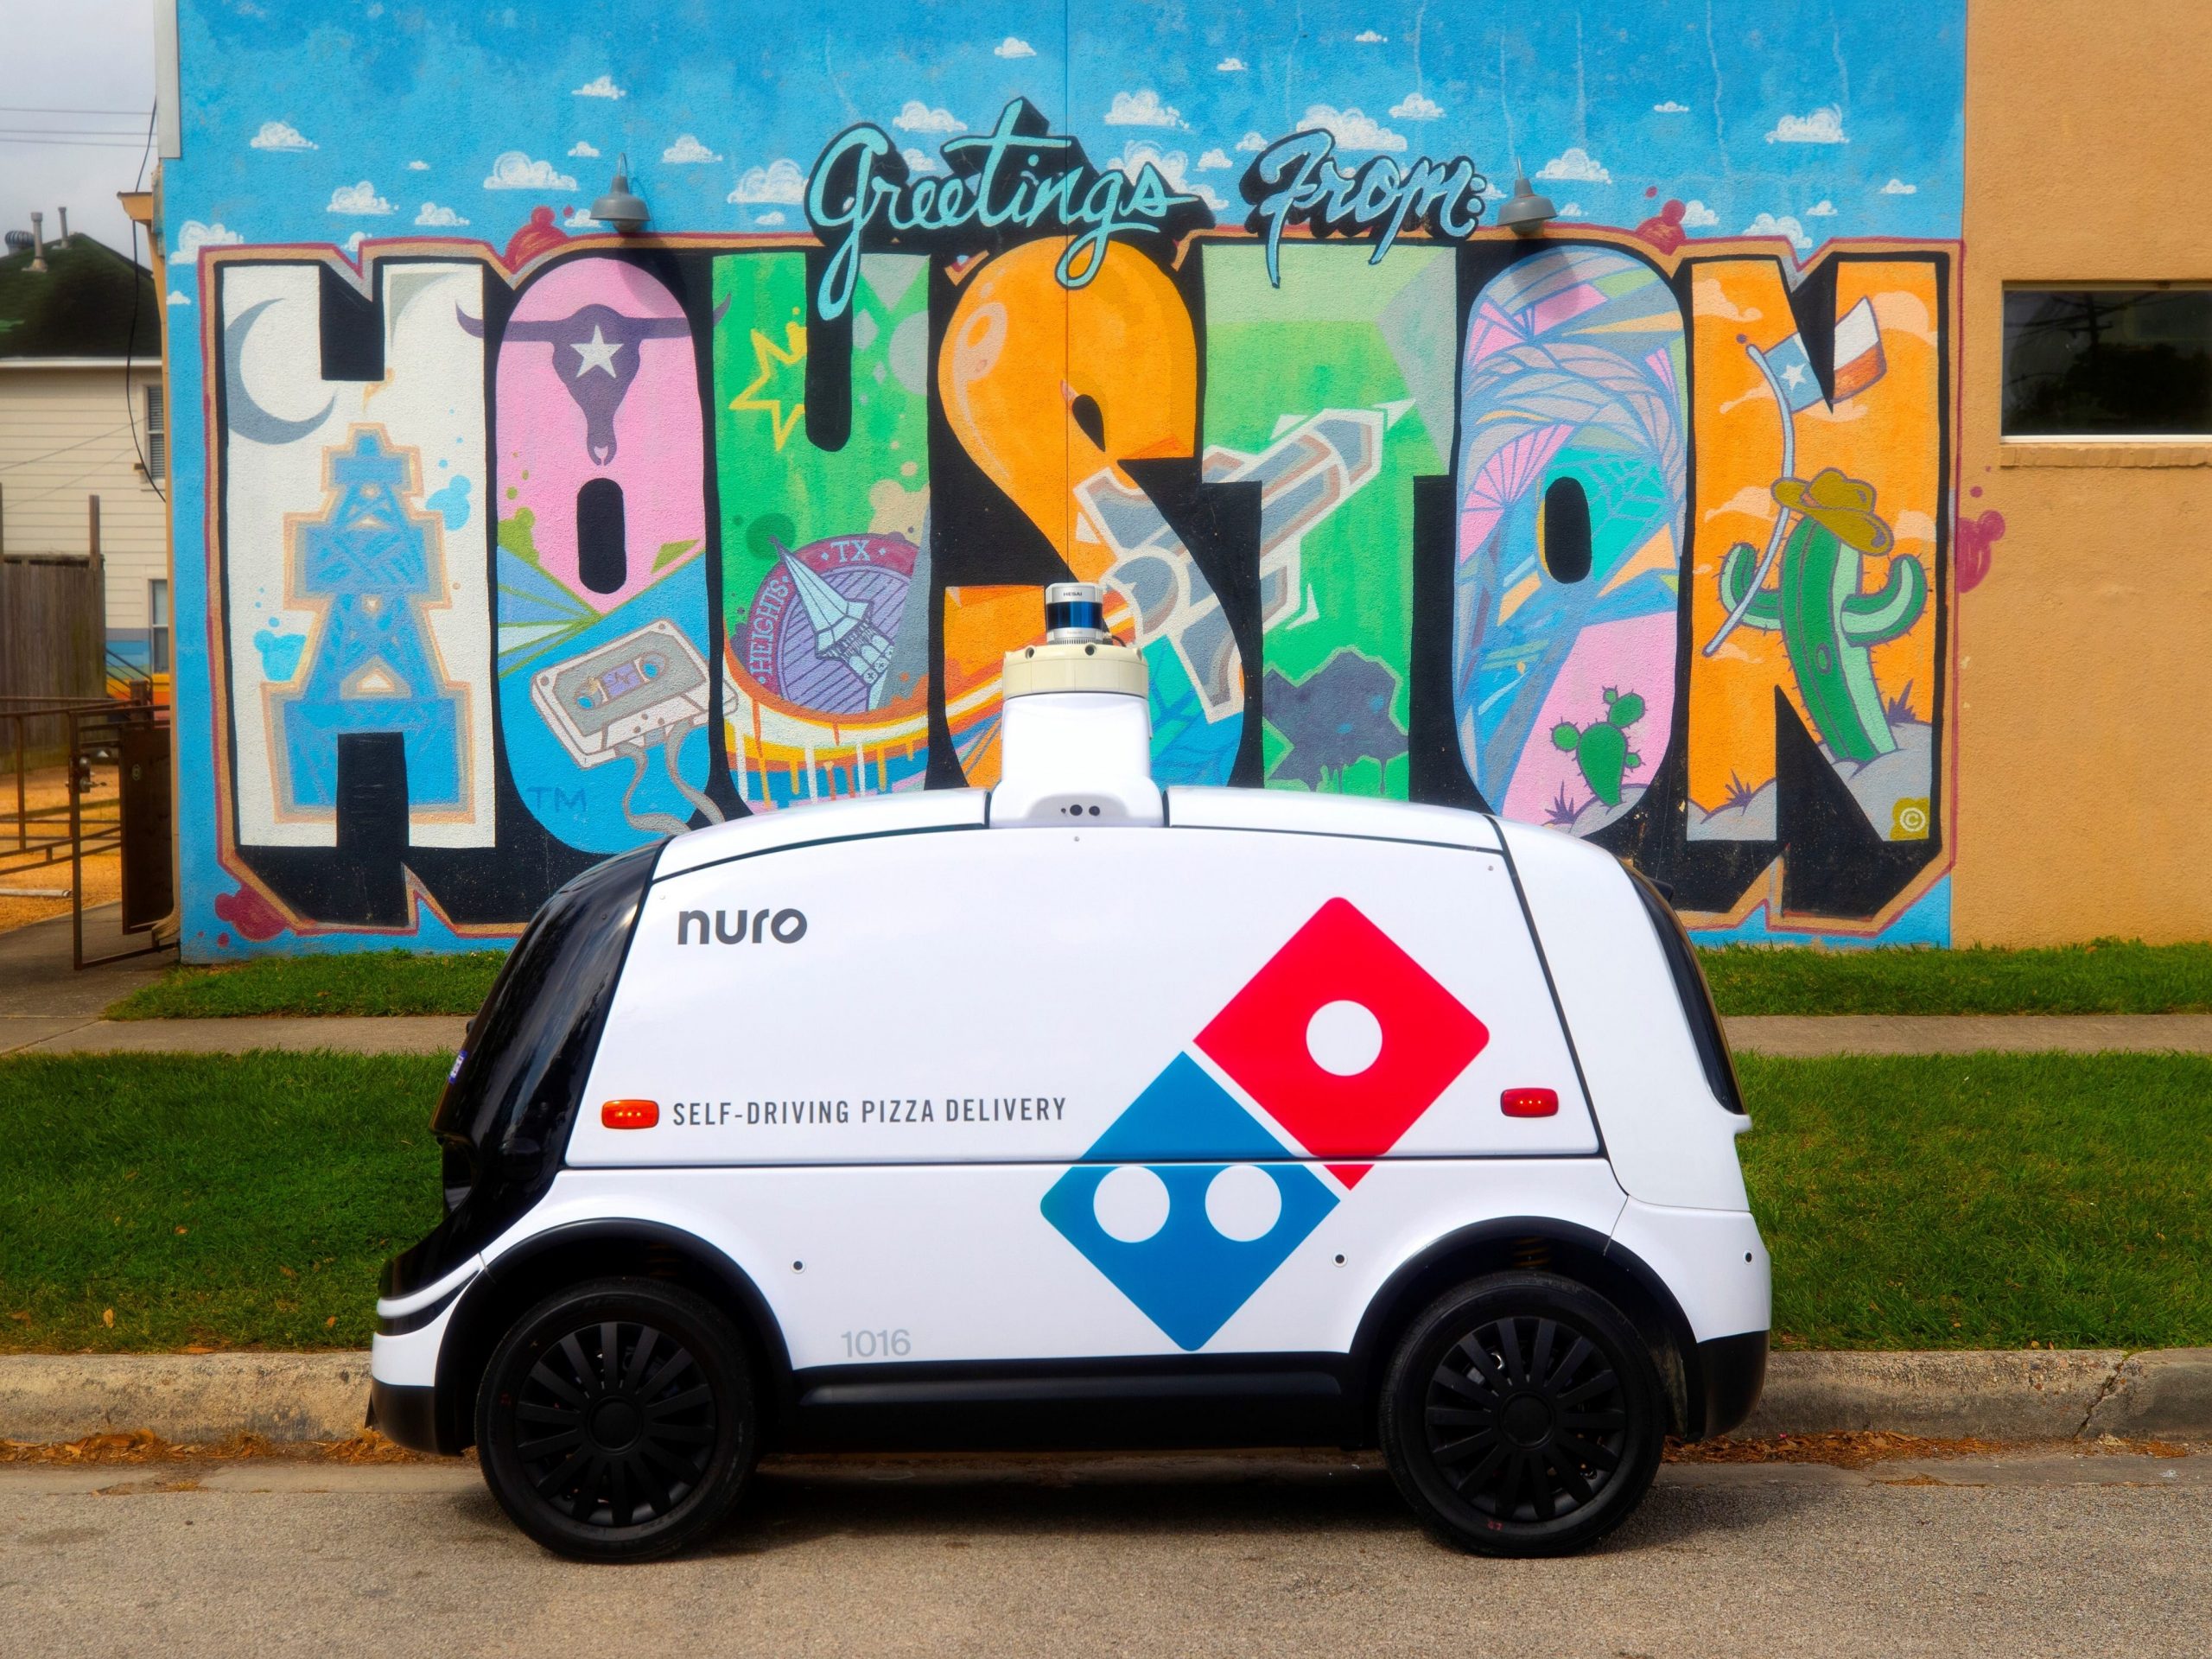 Domino's is launching autonomous pizza delivery with a tiny self